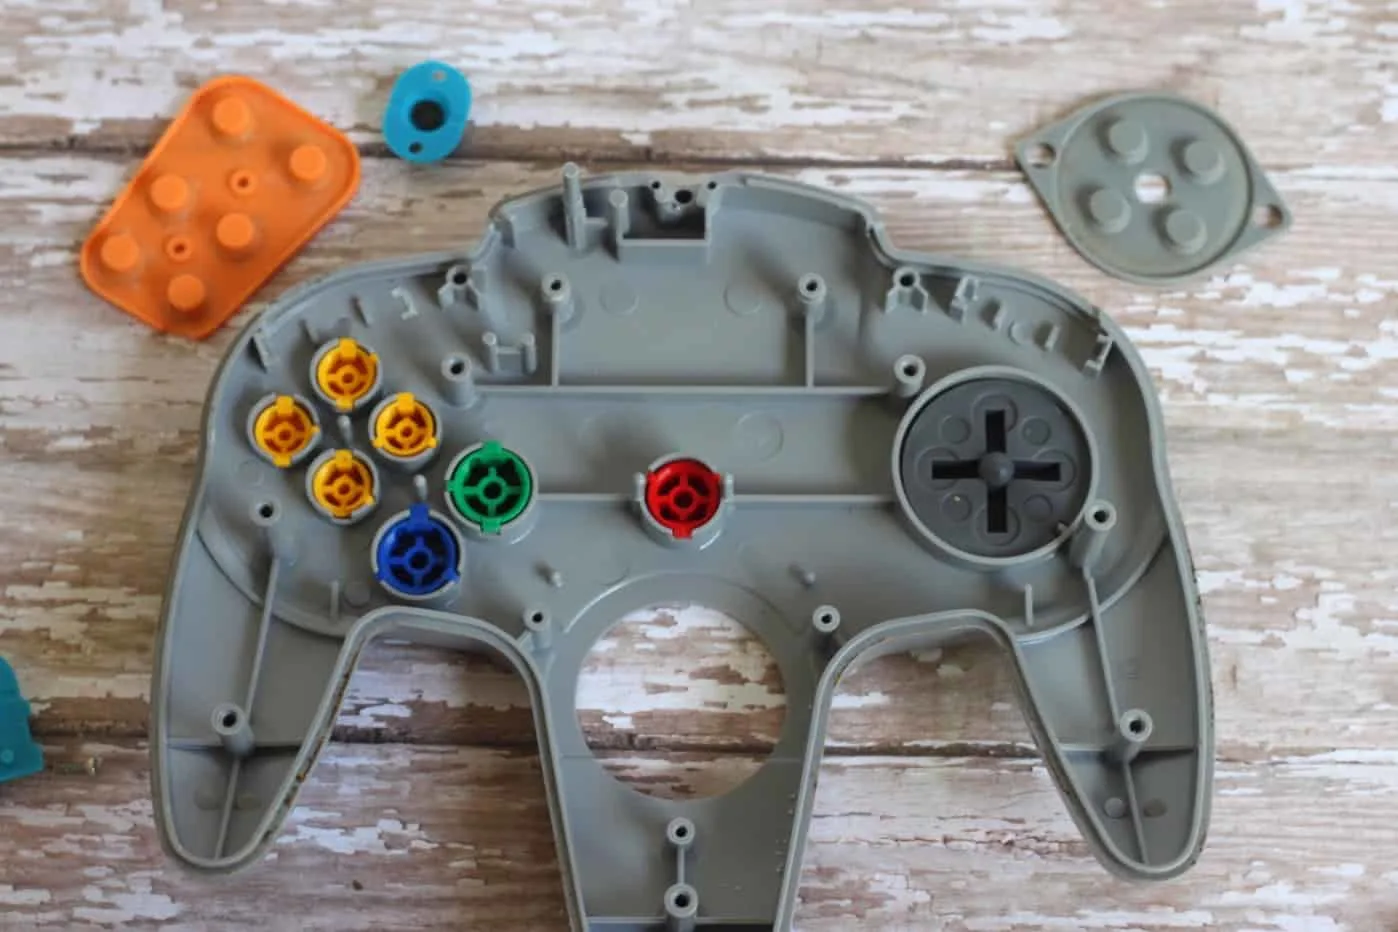 Nintendo 64 controller with the parts removed